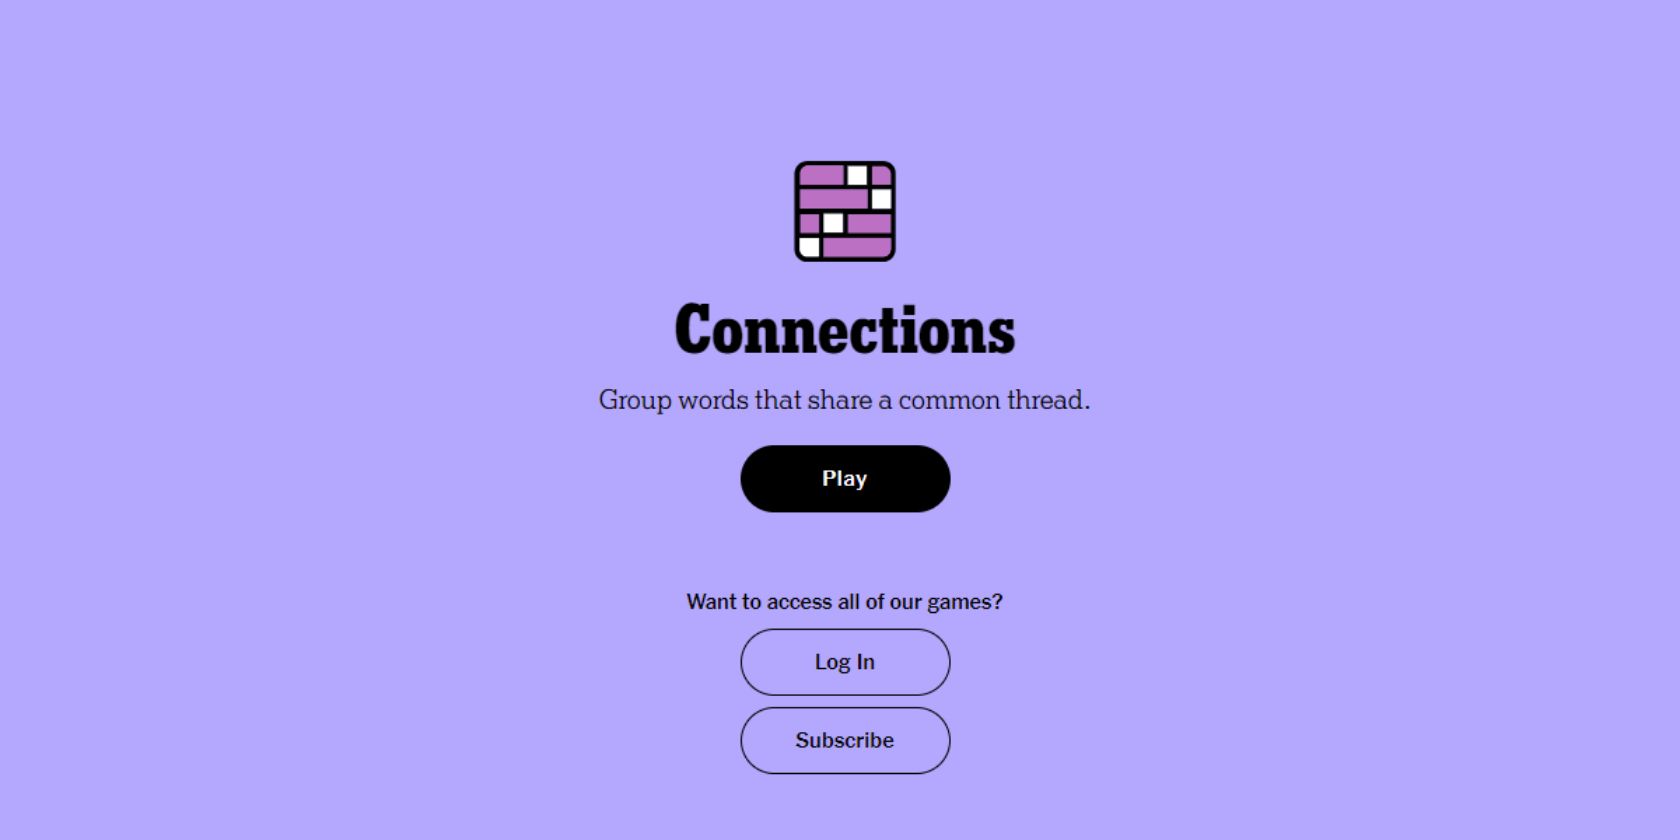 The New York Times' Connections game homepage